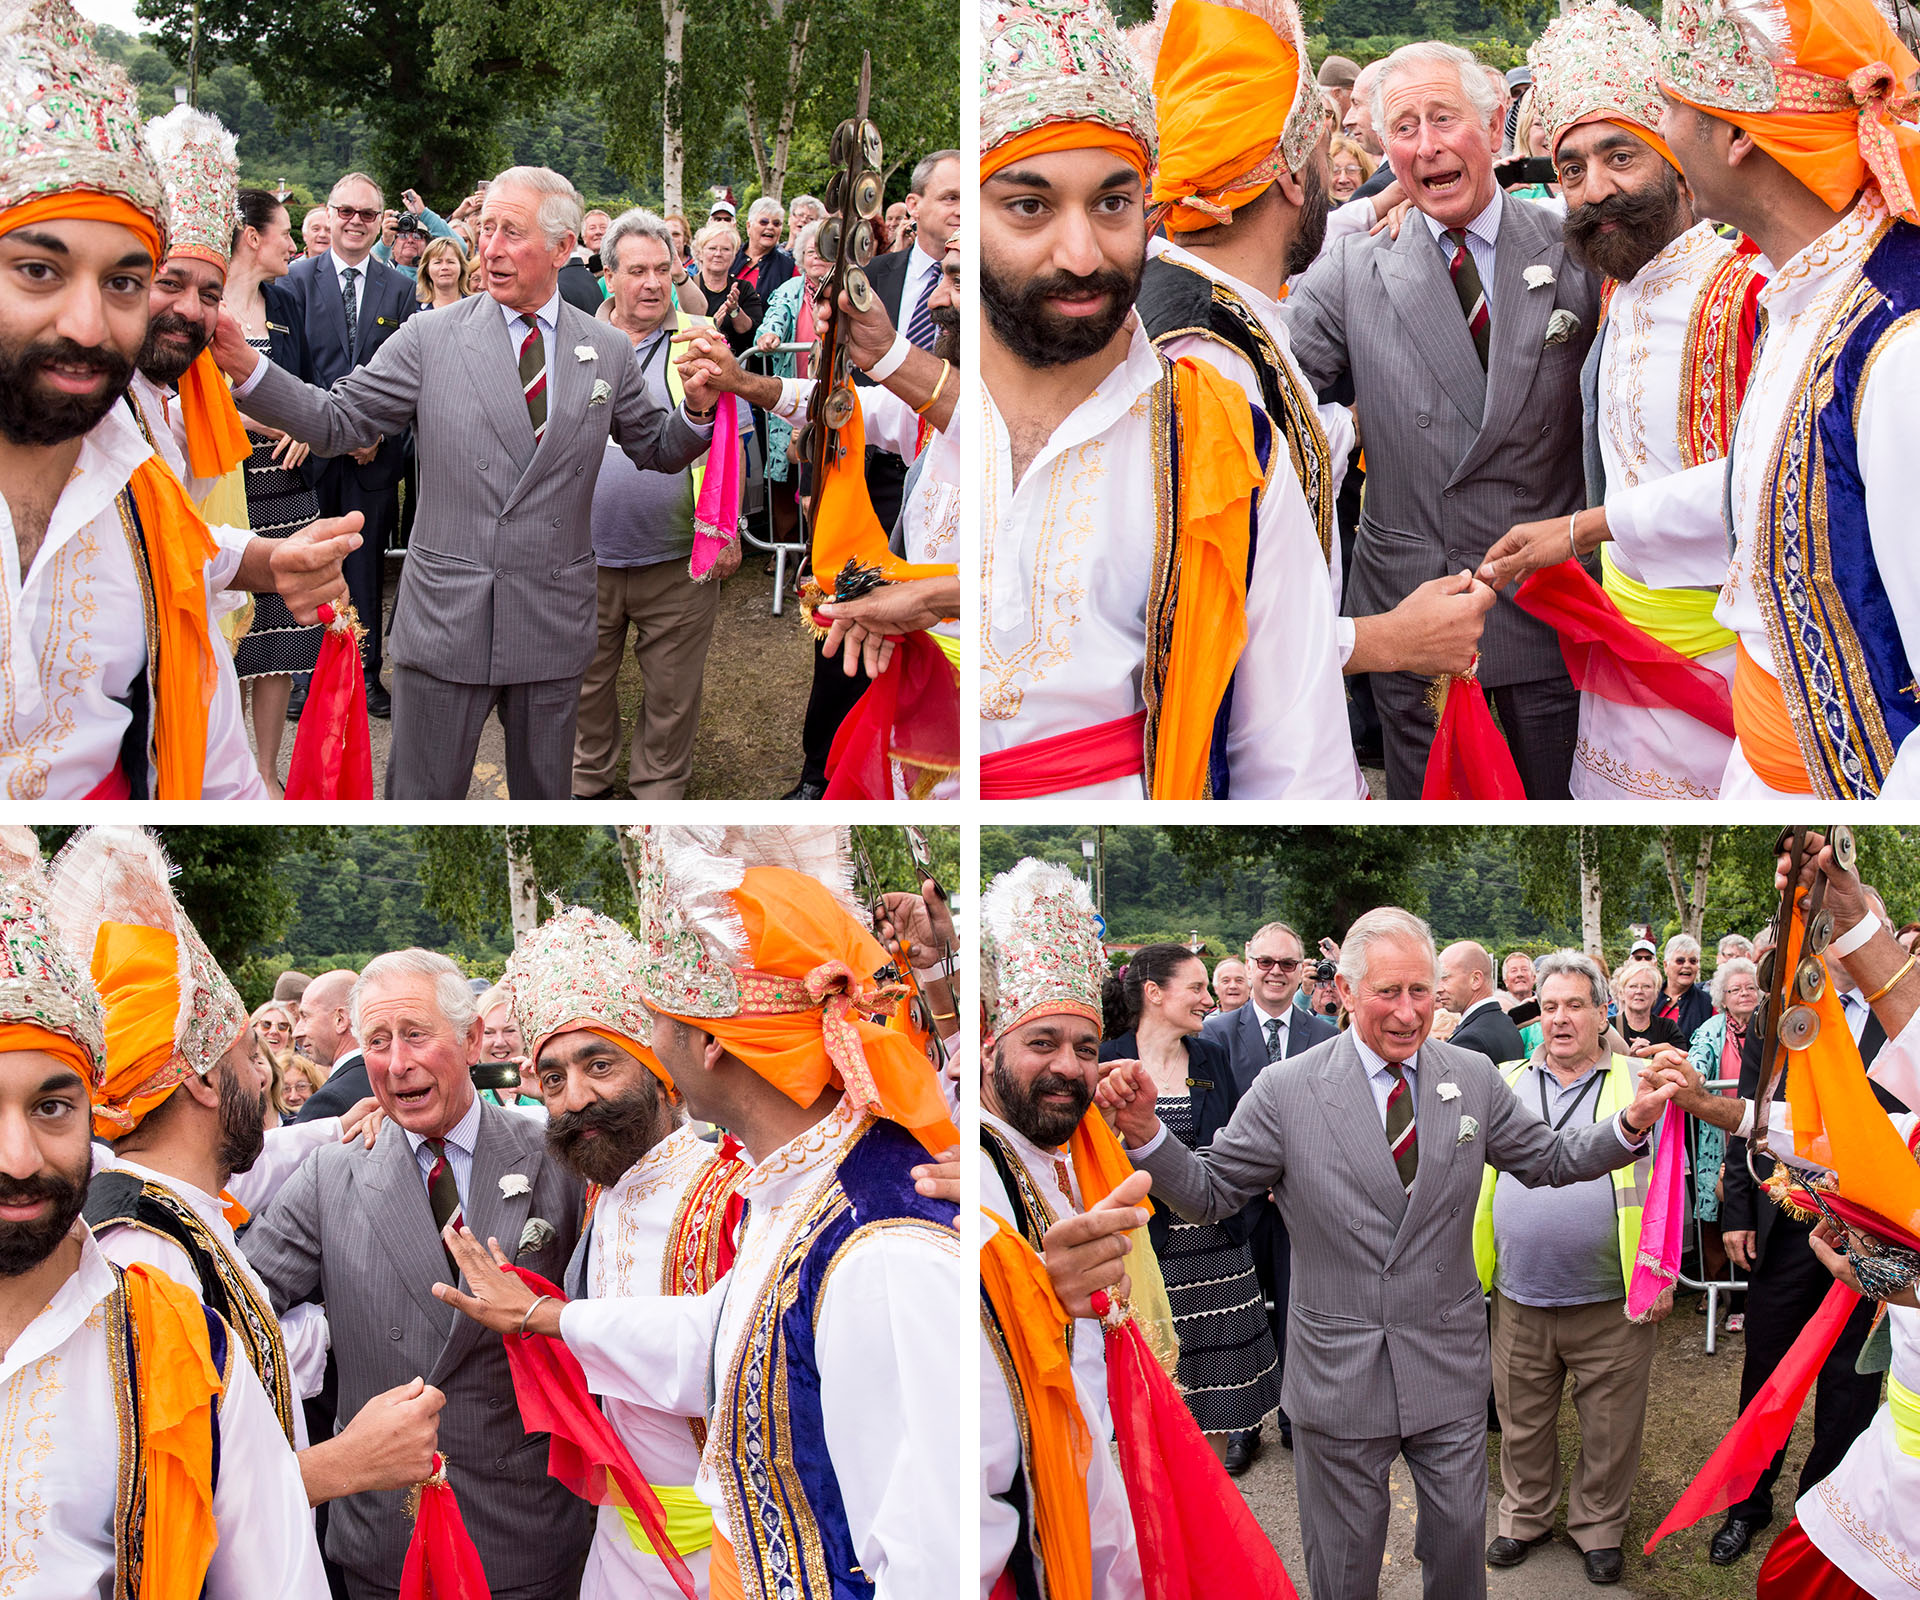 What a good sport: Prince Charles shows off his dance moves in Wales